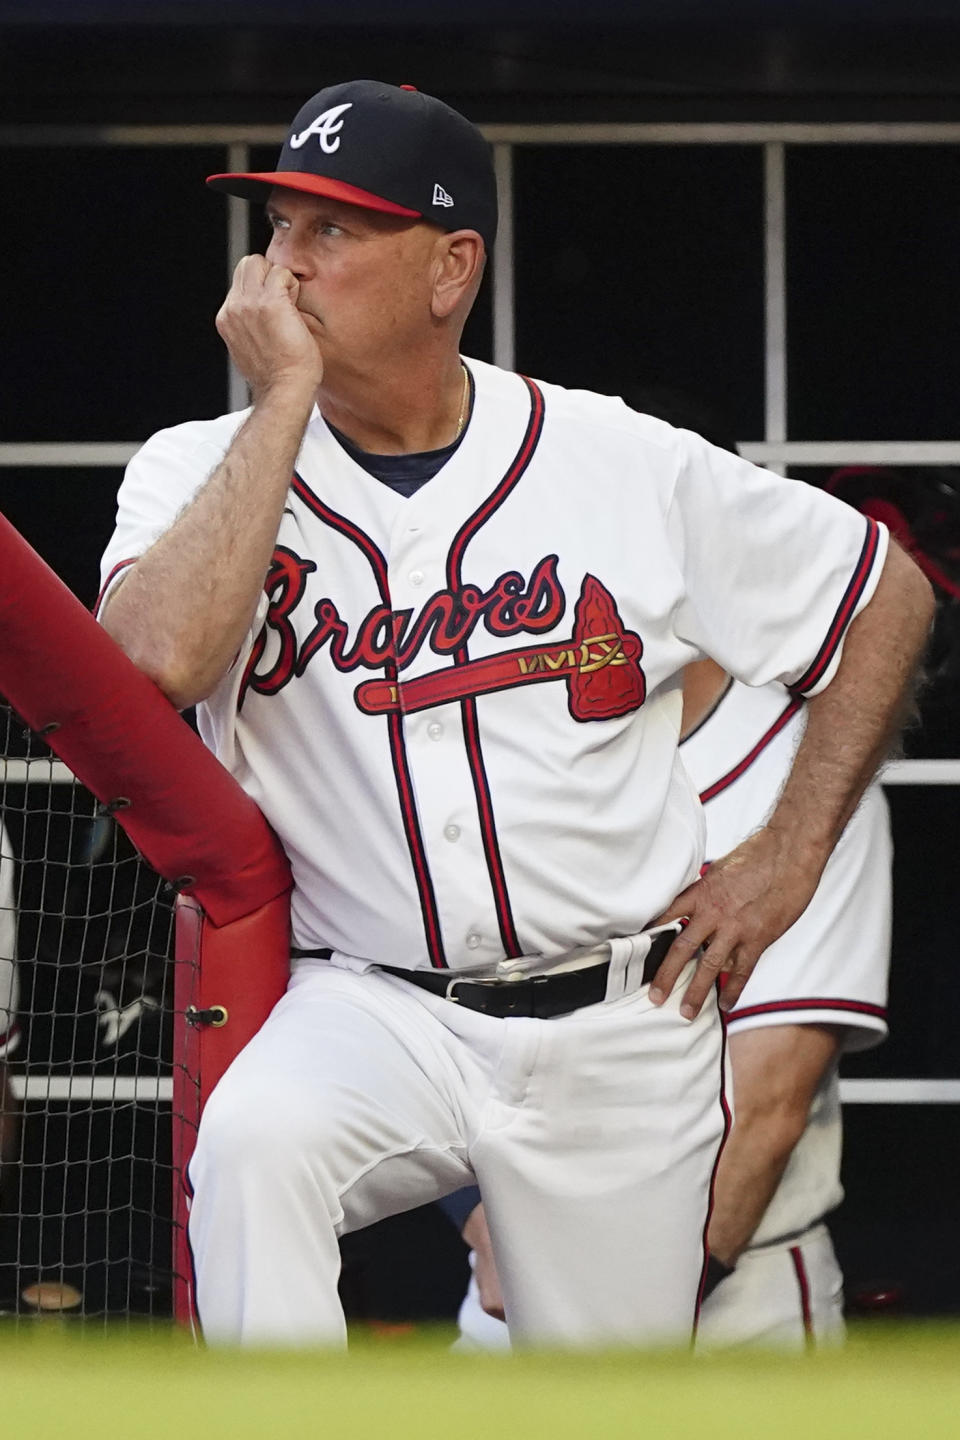 Atlanta Braves manager Brian Snitker (43) watches his team battle the Boston Red Sox during a baseball game Wednesday, May 11, 2022, in Atlanta. (AP Photo/John Bazemore)